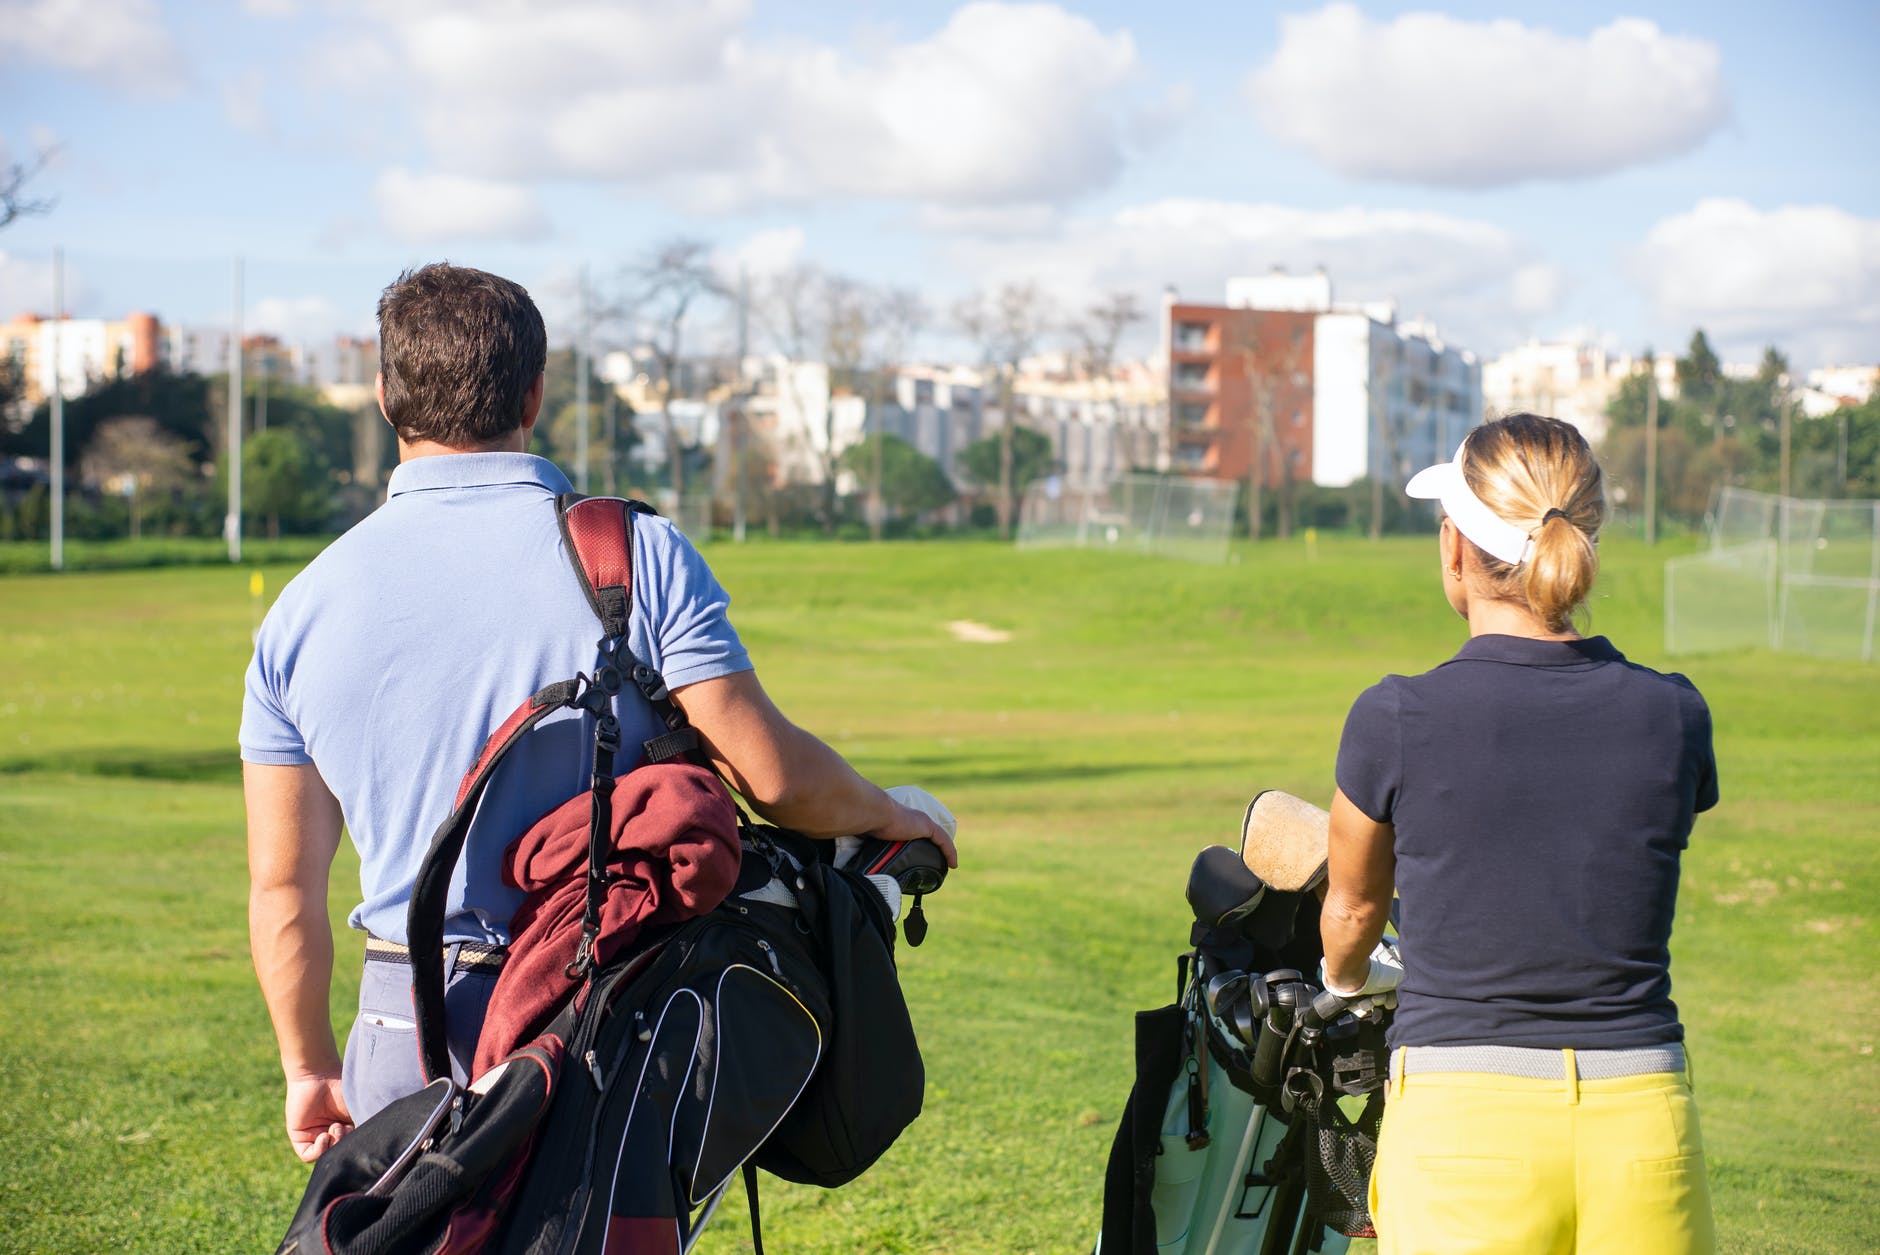 a back view of a man and woman carrying golf equipments